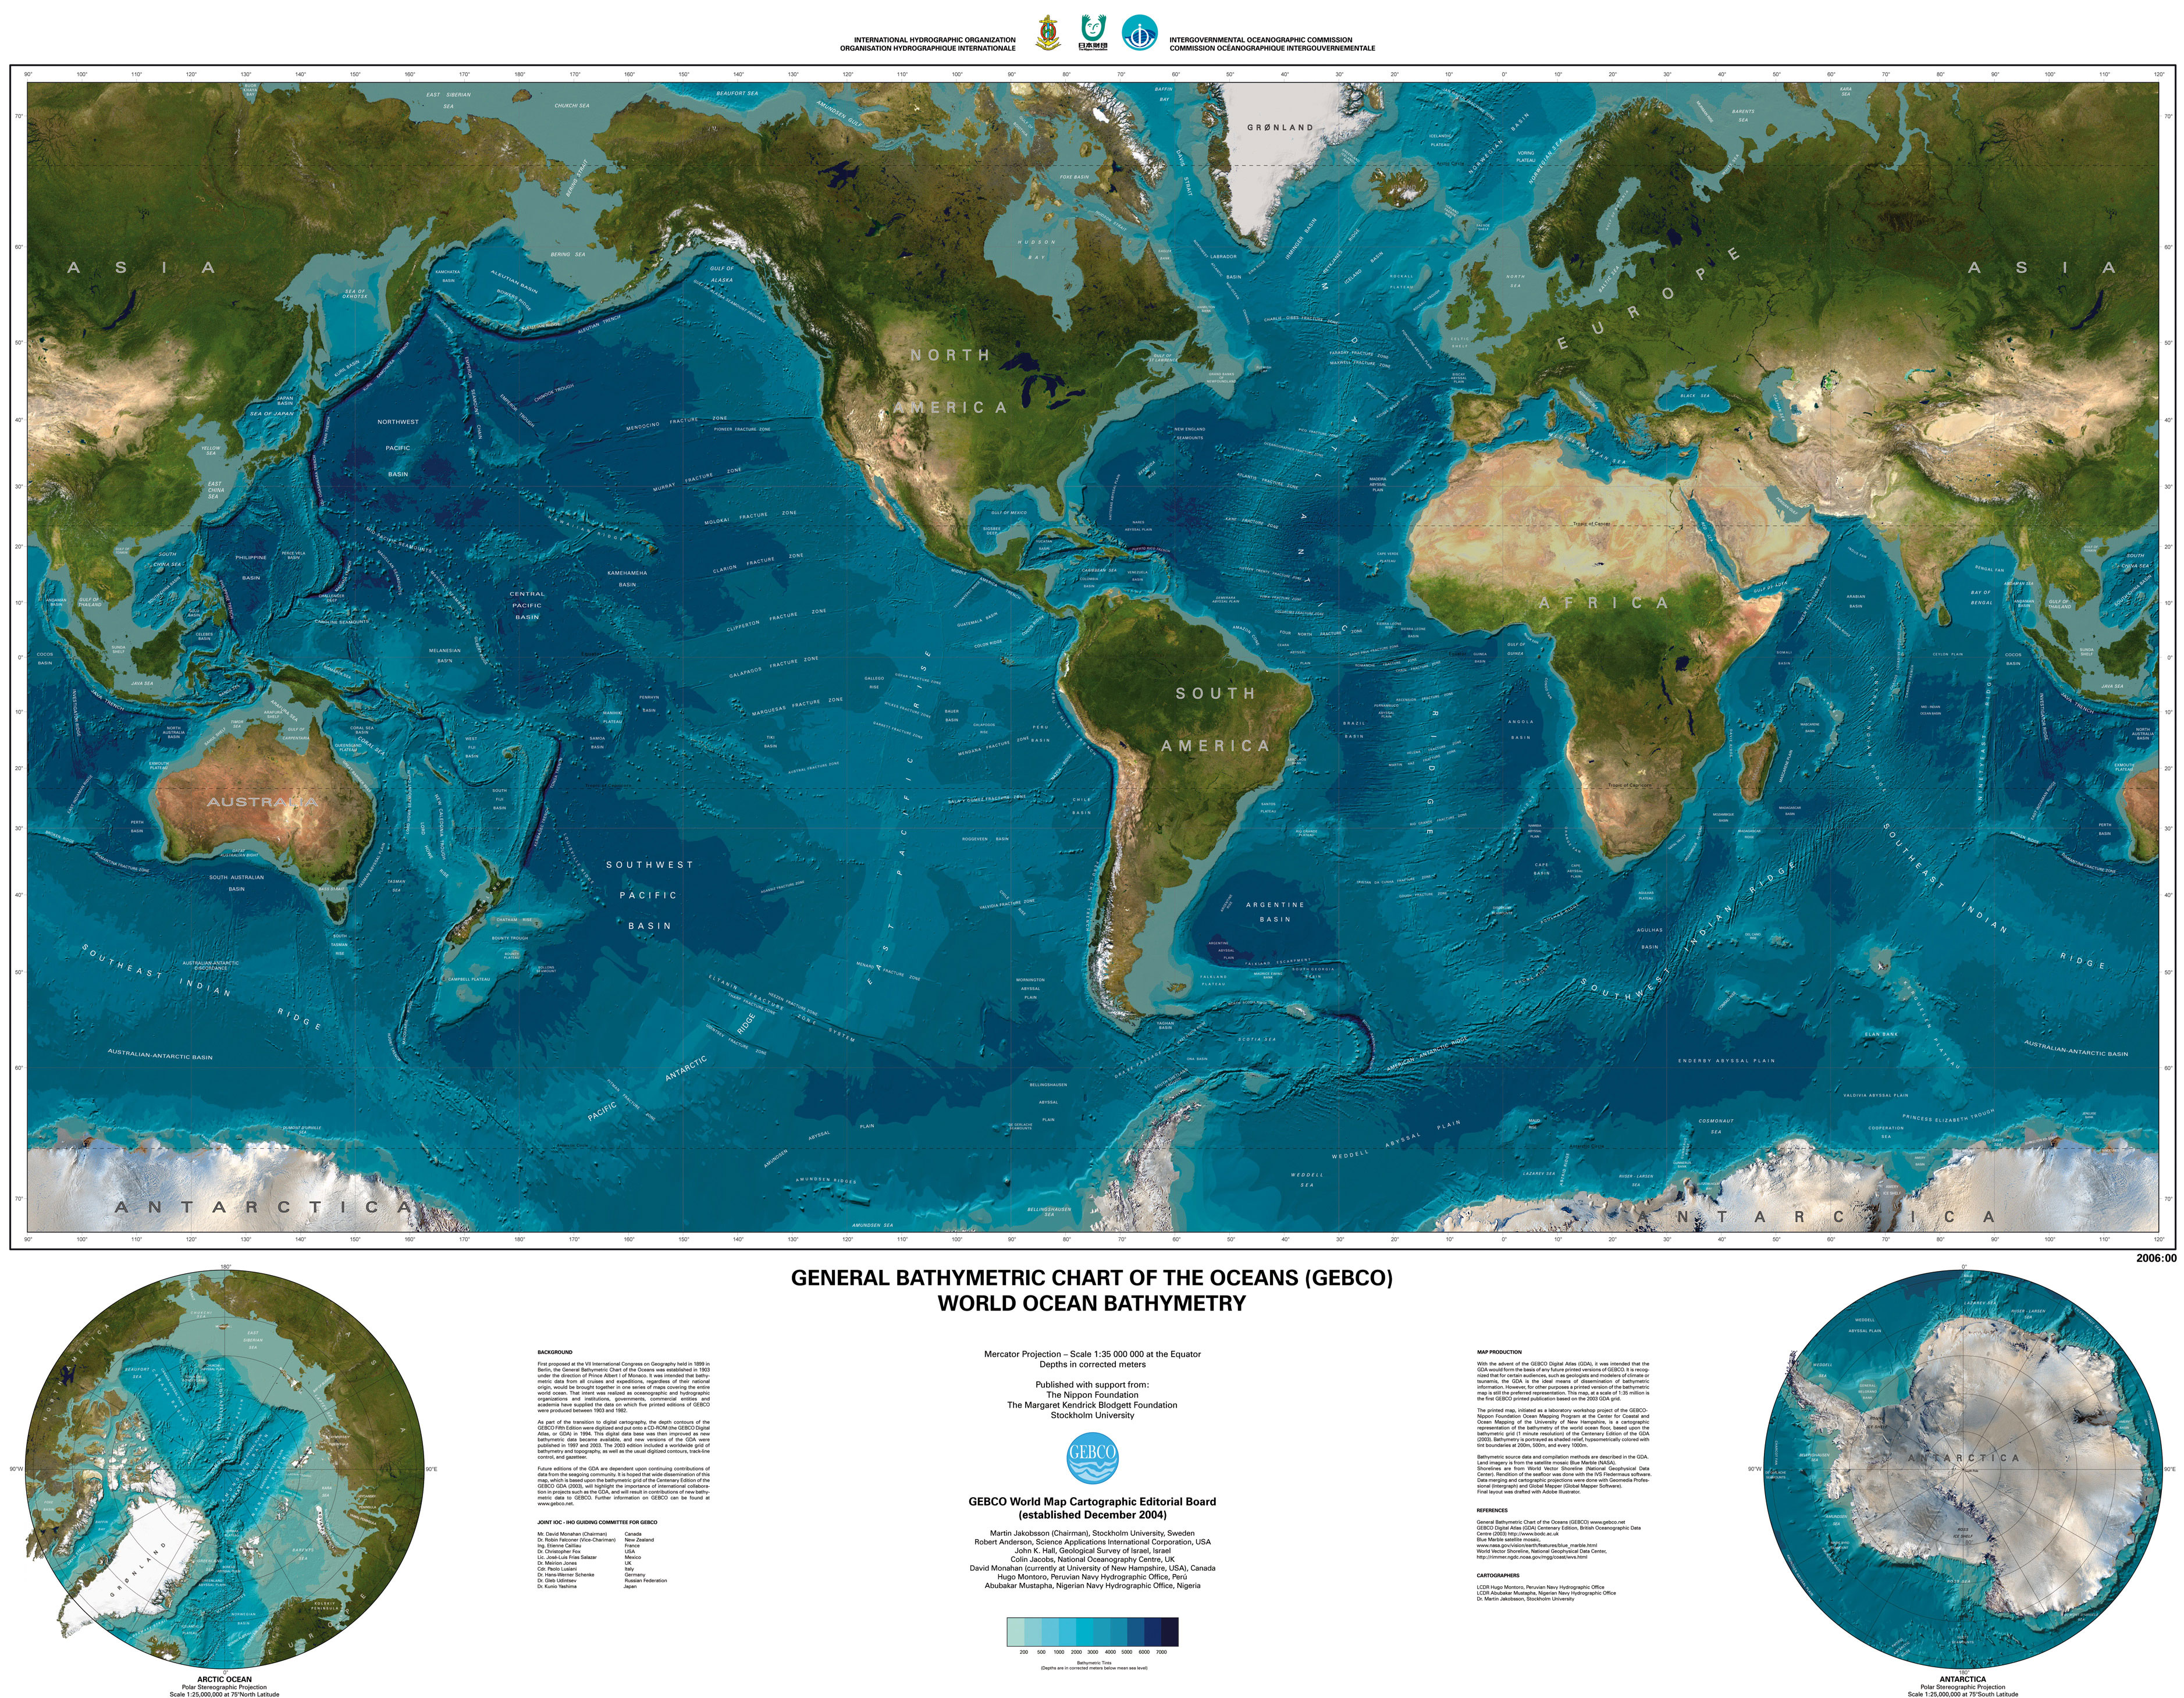 Map of topography of the oceans